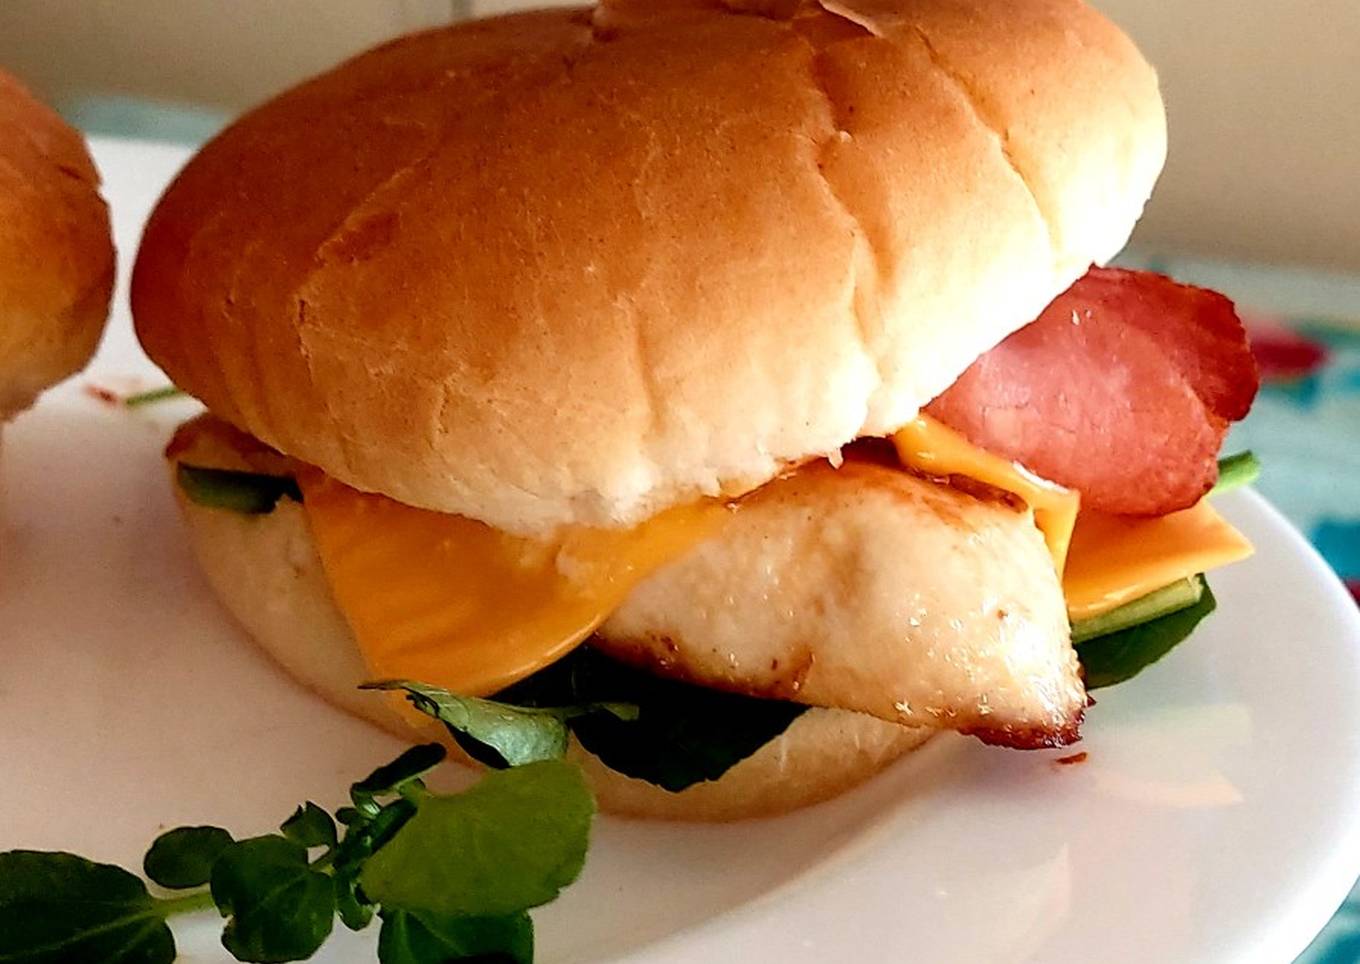 A Plain Chicken Bacon & Cheese Burger with Watercress